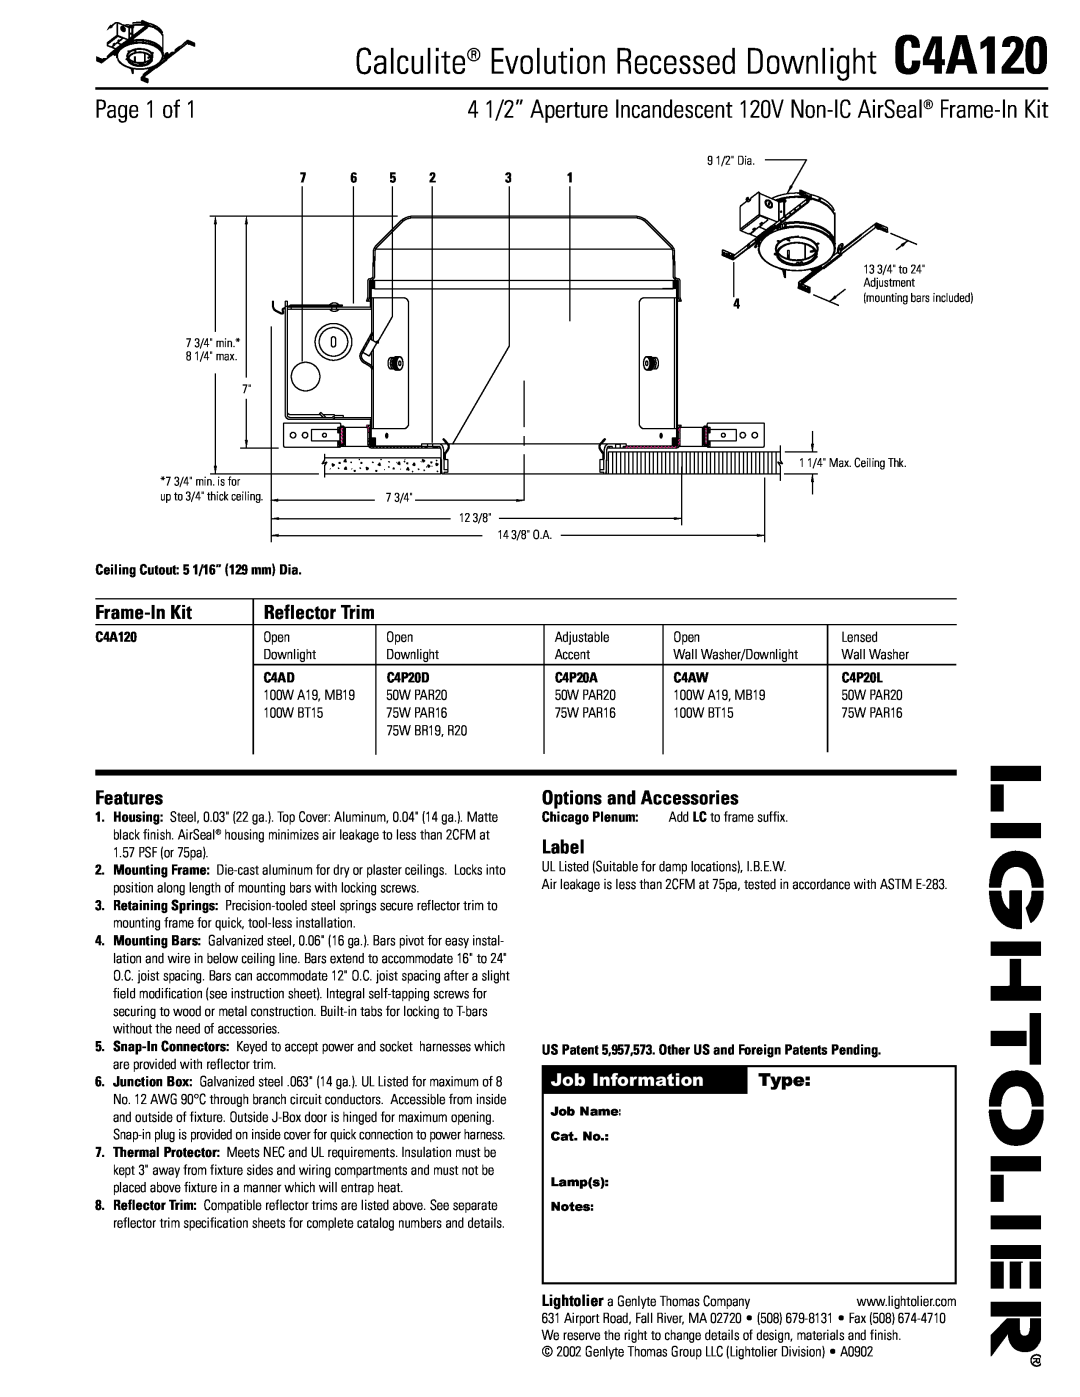 Lightolier instruction sheet Calculite Evolution Recessed Downlight C4A120, Page 1 of, Frame-InKit, Features, Label 